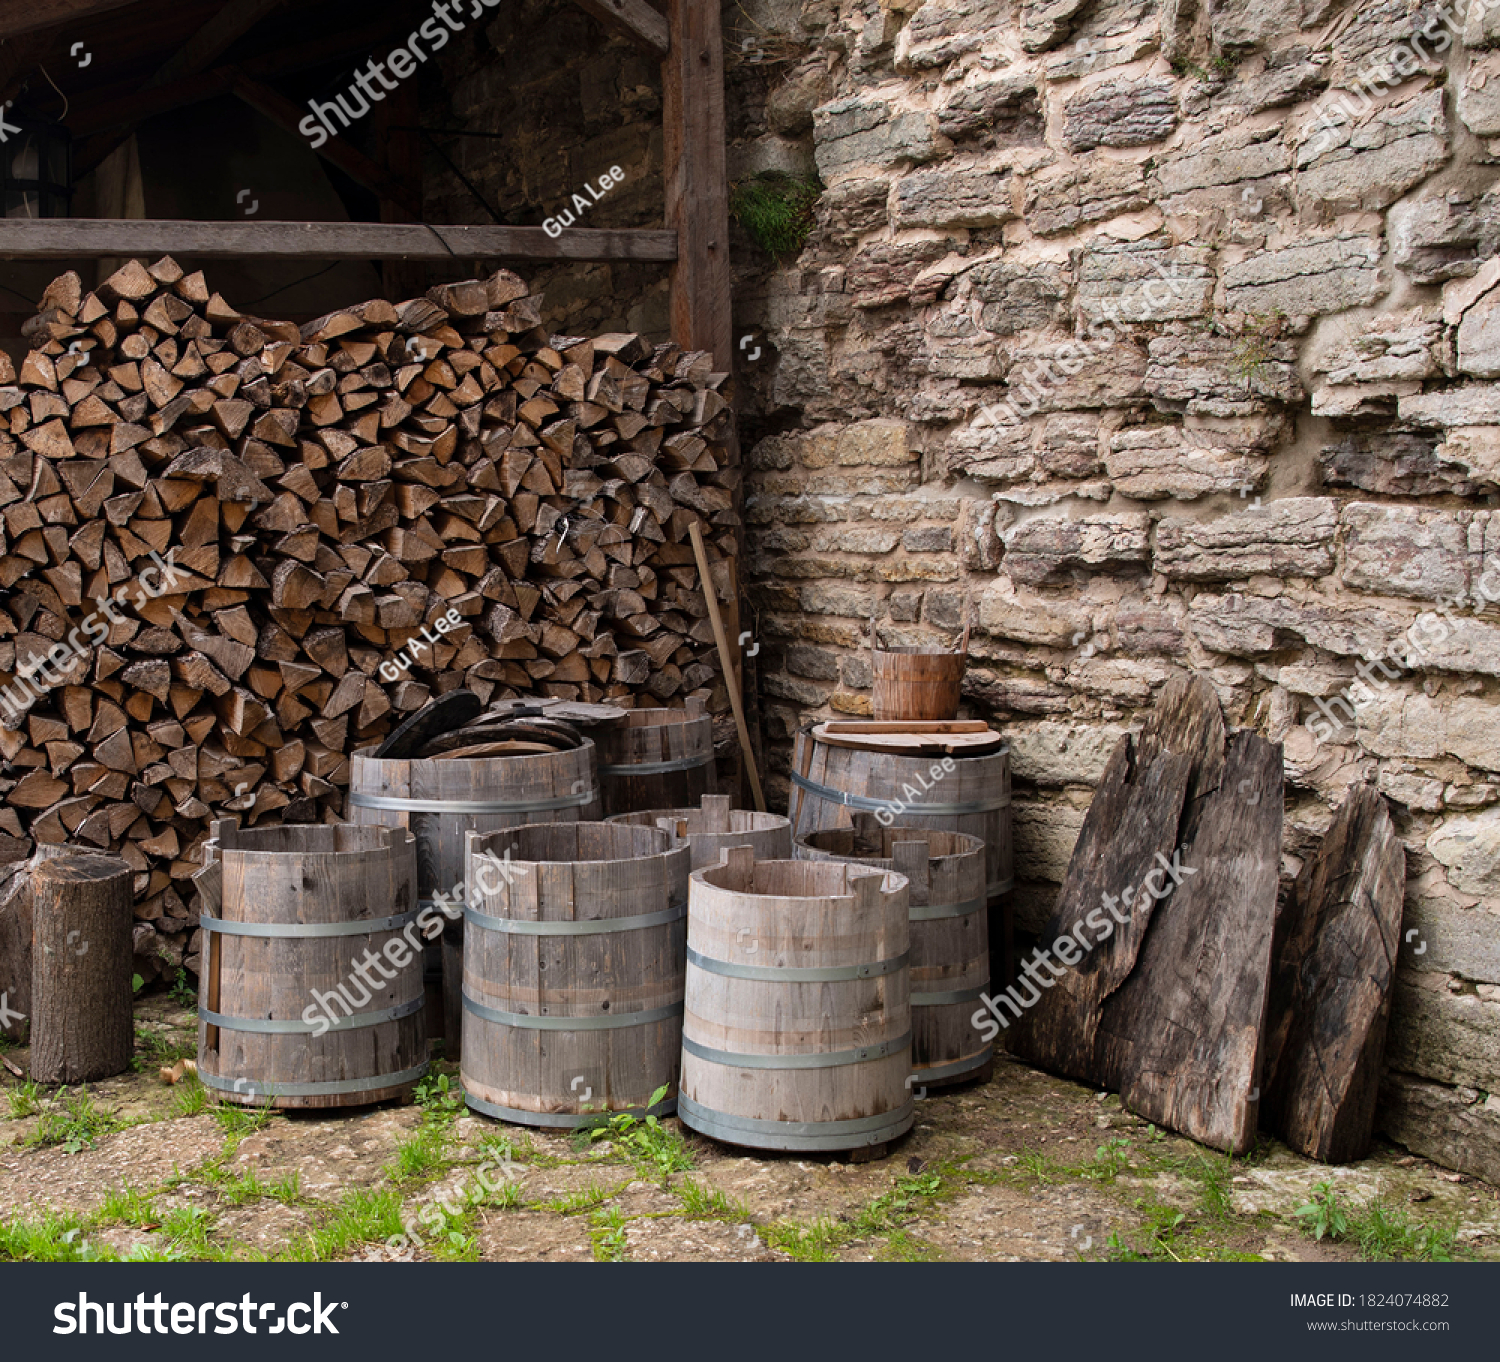 There are barrels and tubs near the wall of the medieval castle, in the background there is a woodpile of chopped wood for the stove. #1824074882